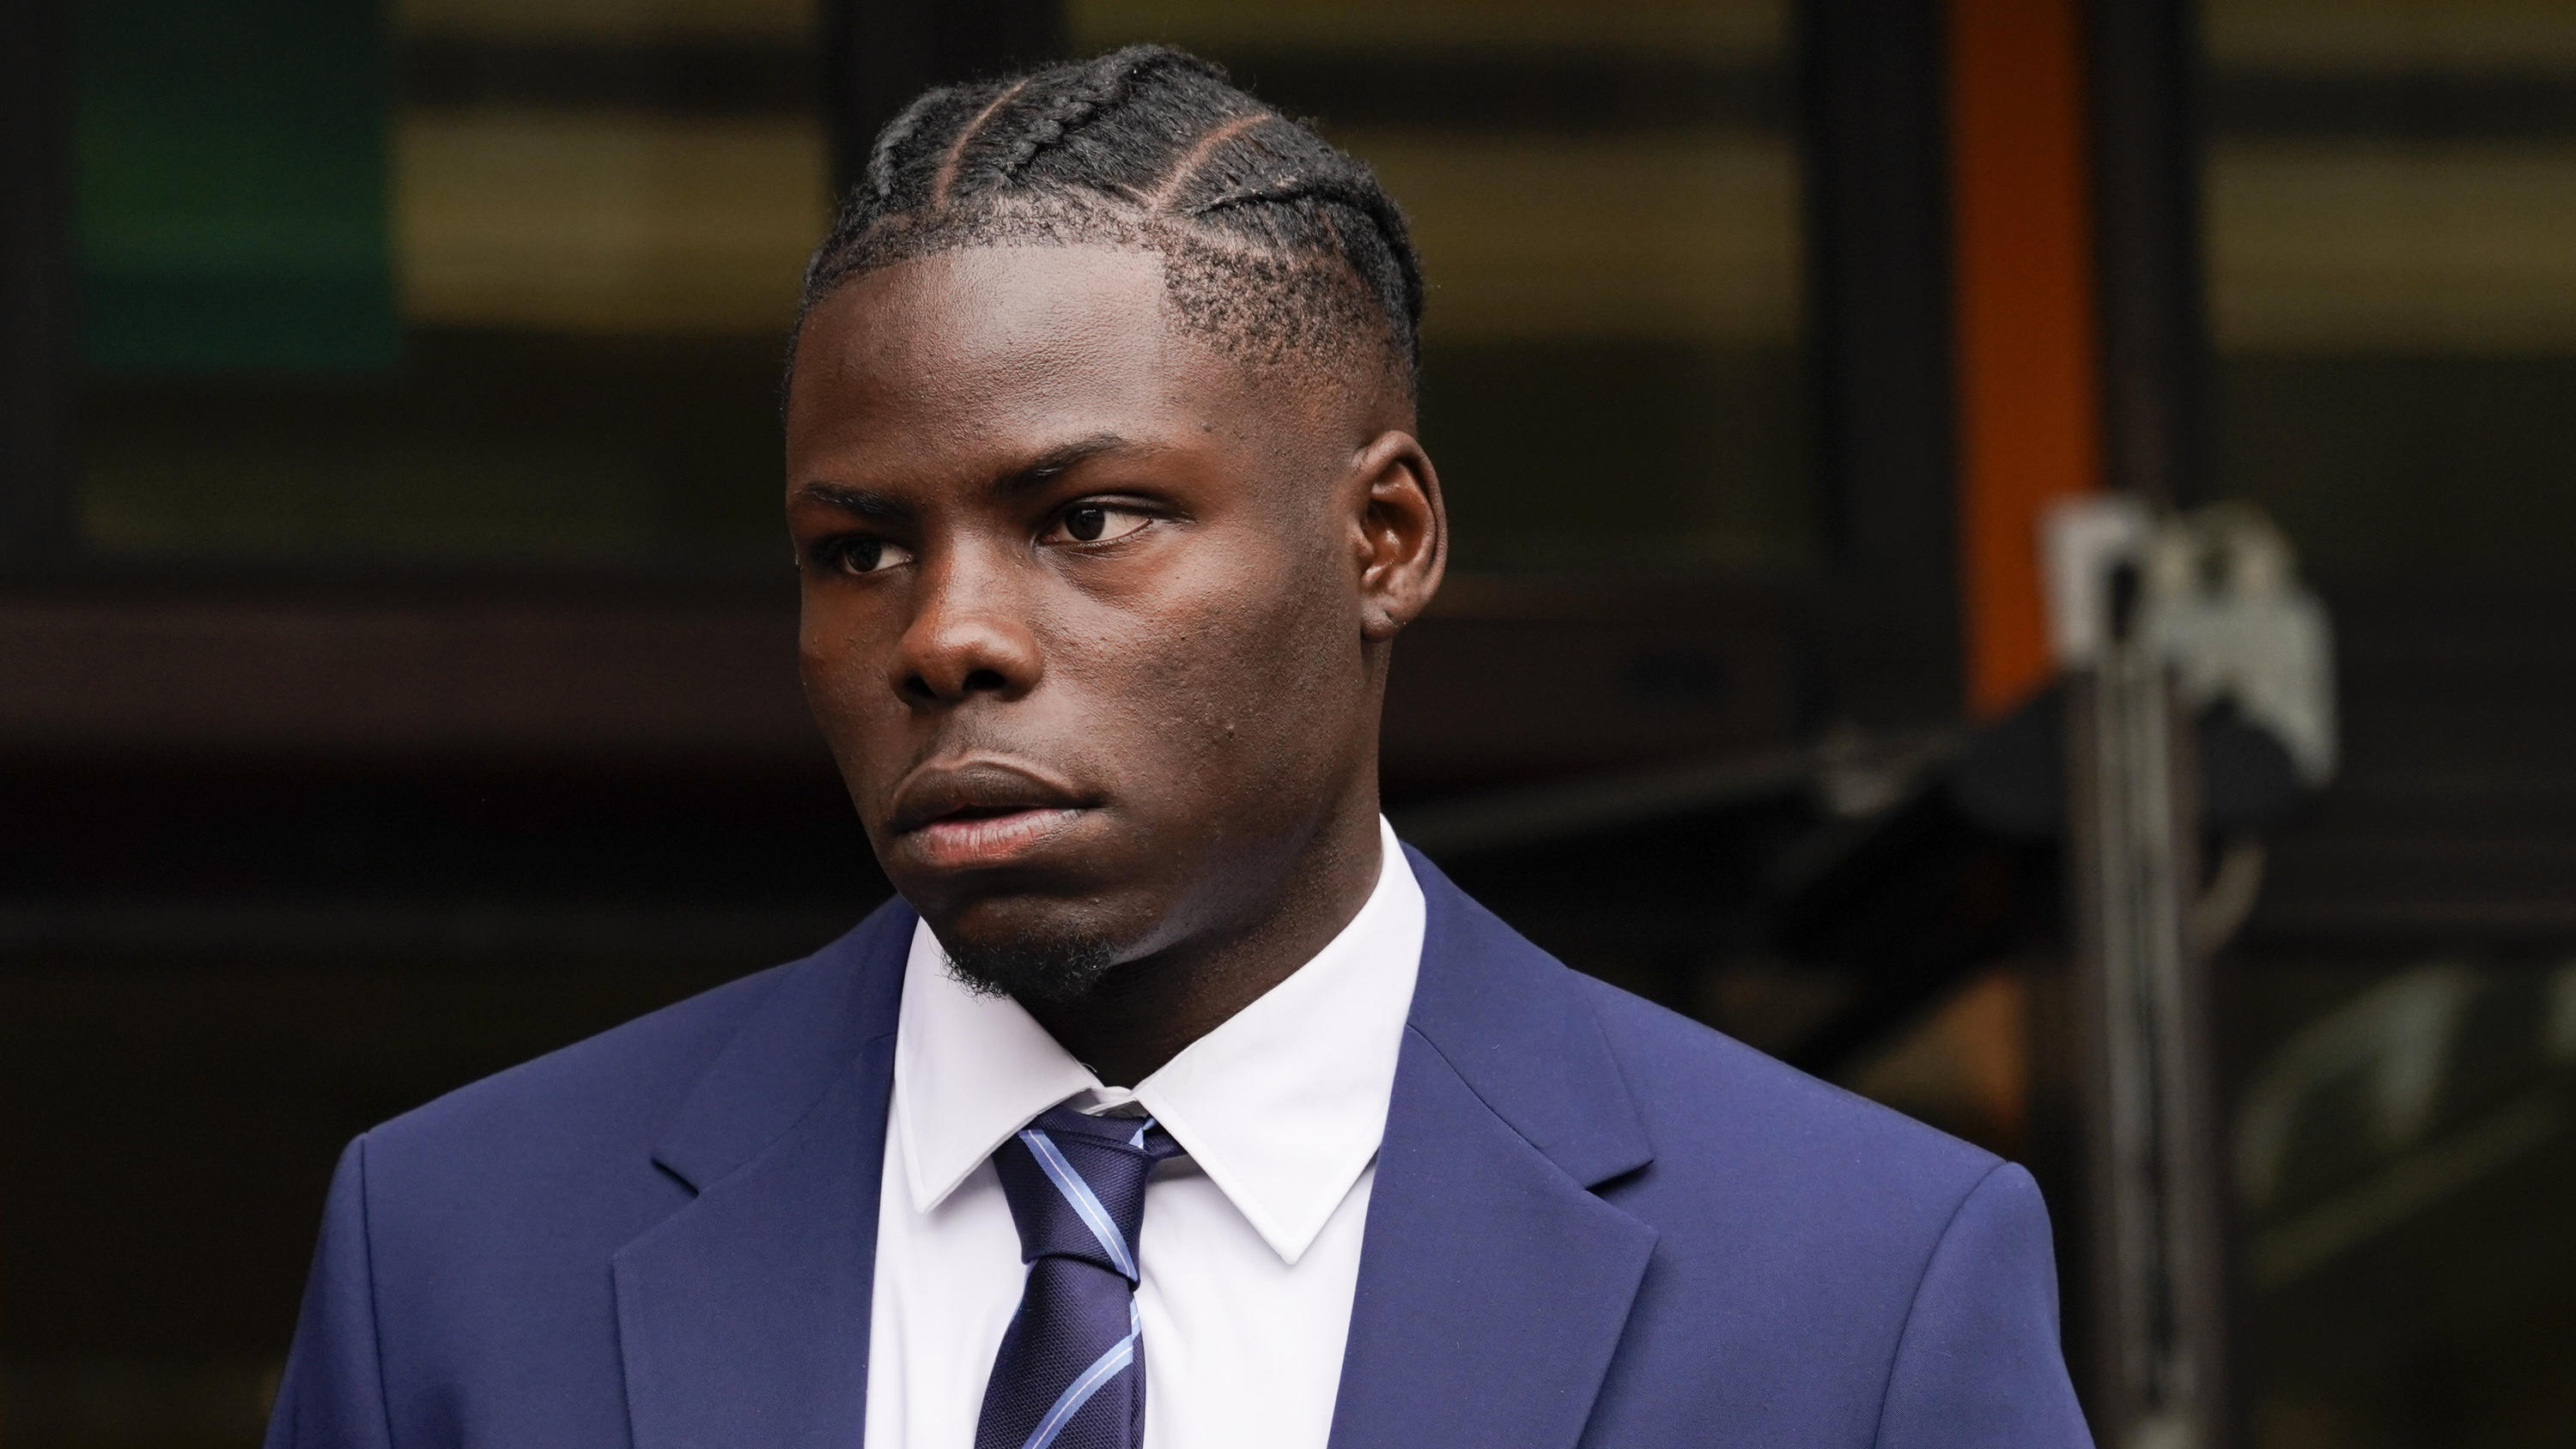 Yoan Zouma, brother of West Ham United player Kurt Zouma, leaves Thames Magistrates Court in London, Tuesday, May 24, 2022. Kurt Zouma has pleaded guilty to kicking and slapping his pet cat in abuse caught on video. The 27-year-old France internation